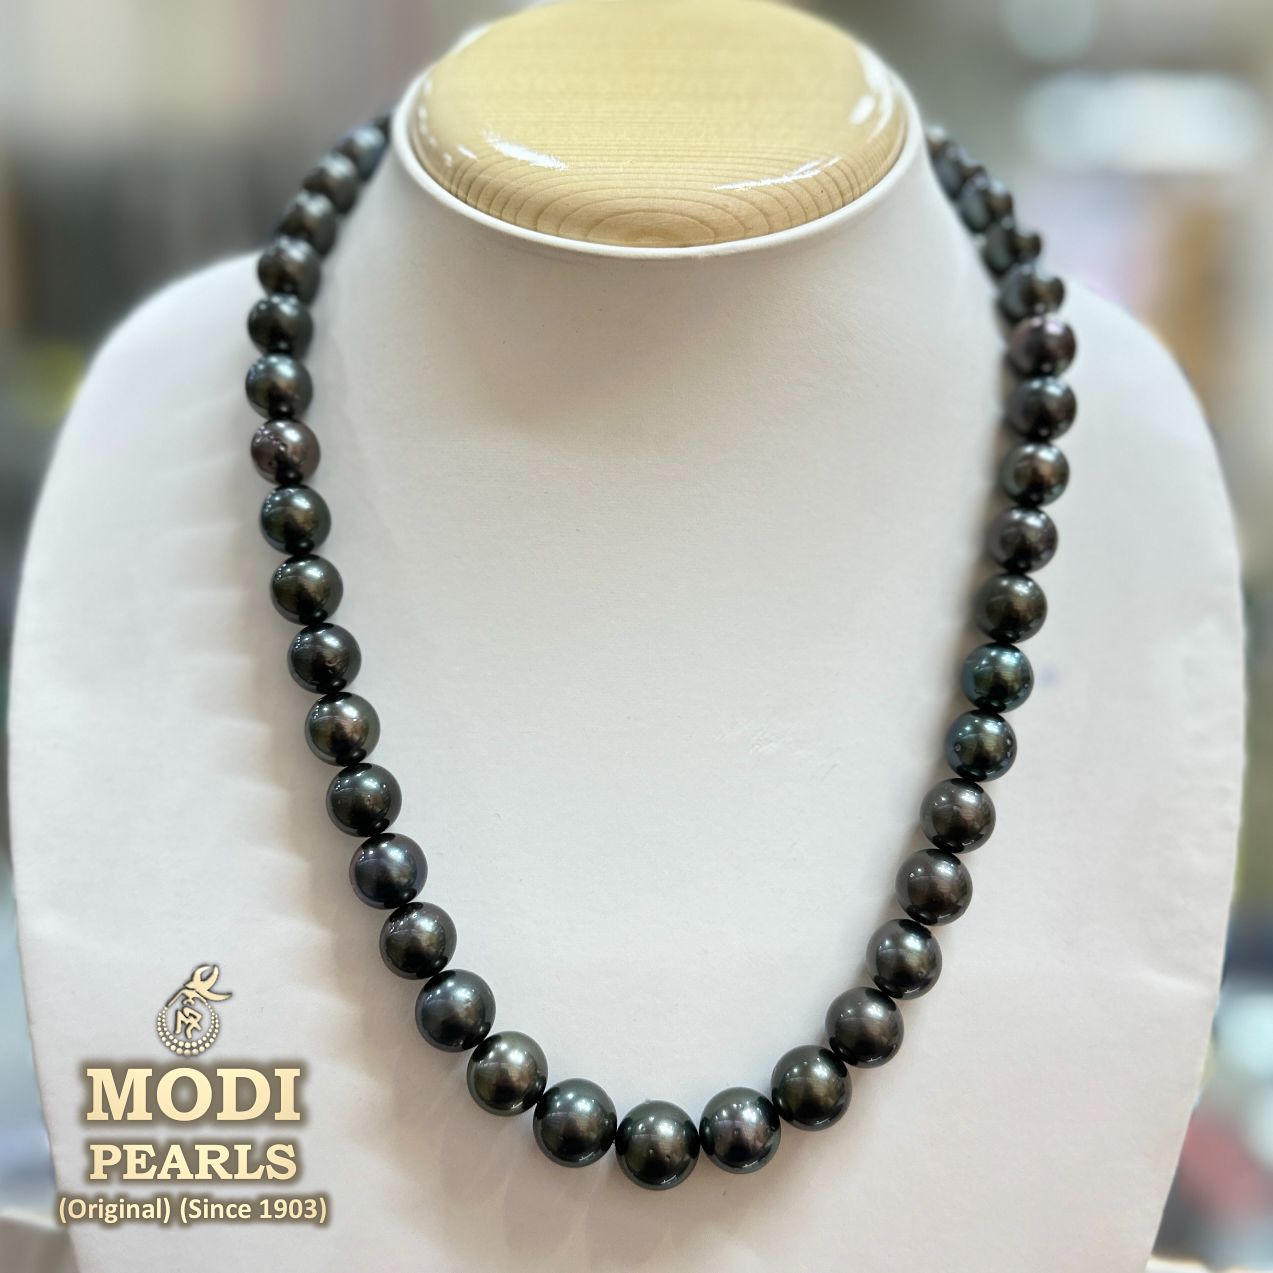 8.4-10.7 mm AA+/AAA Tahitian Round Pearl Necklace – Pearl Paradise